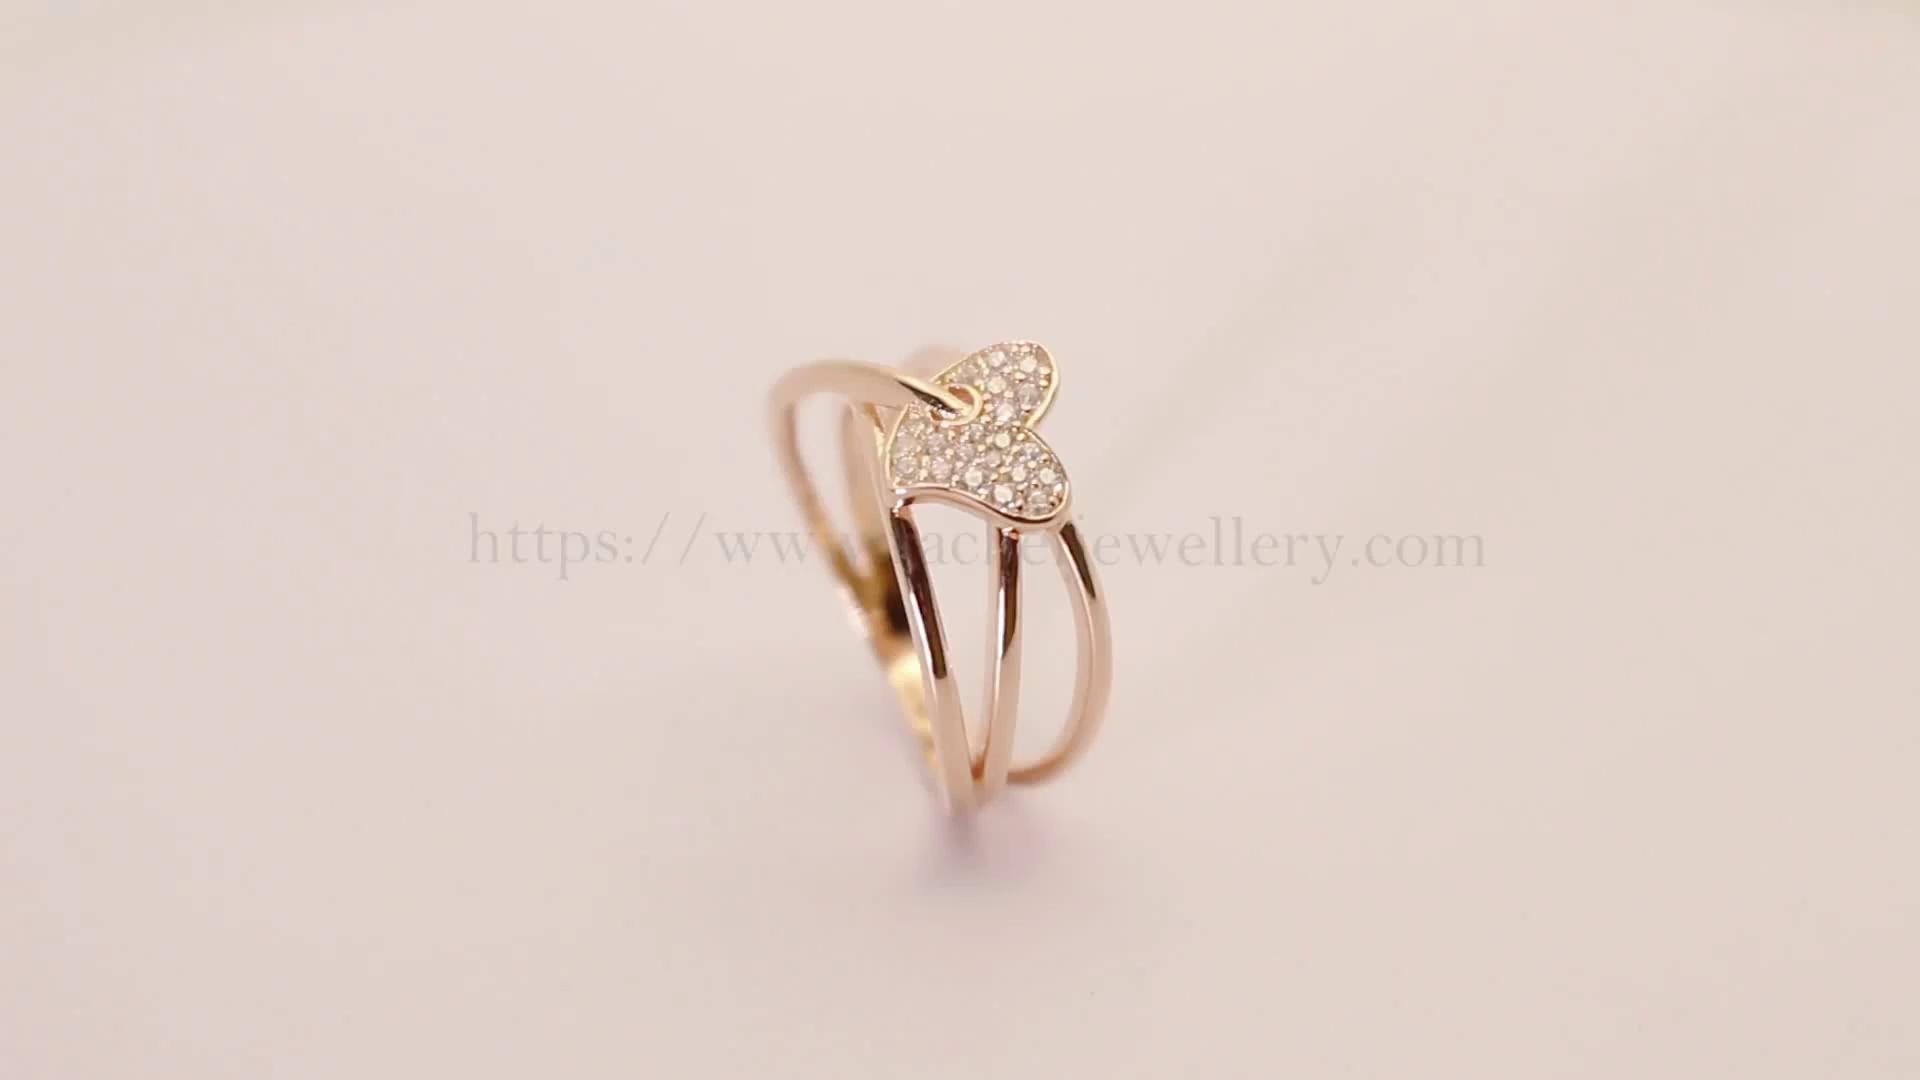 heart silver ring with cubic zirconia, silver cubic zirconia heart ring, cz stone rings